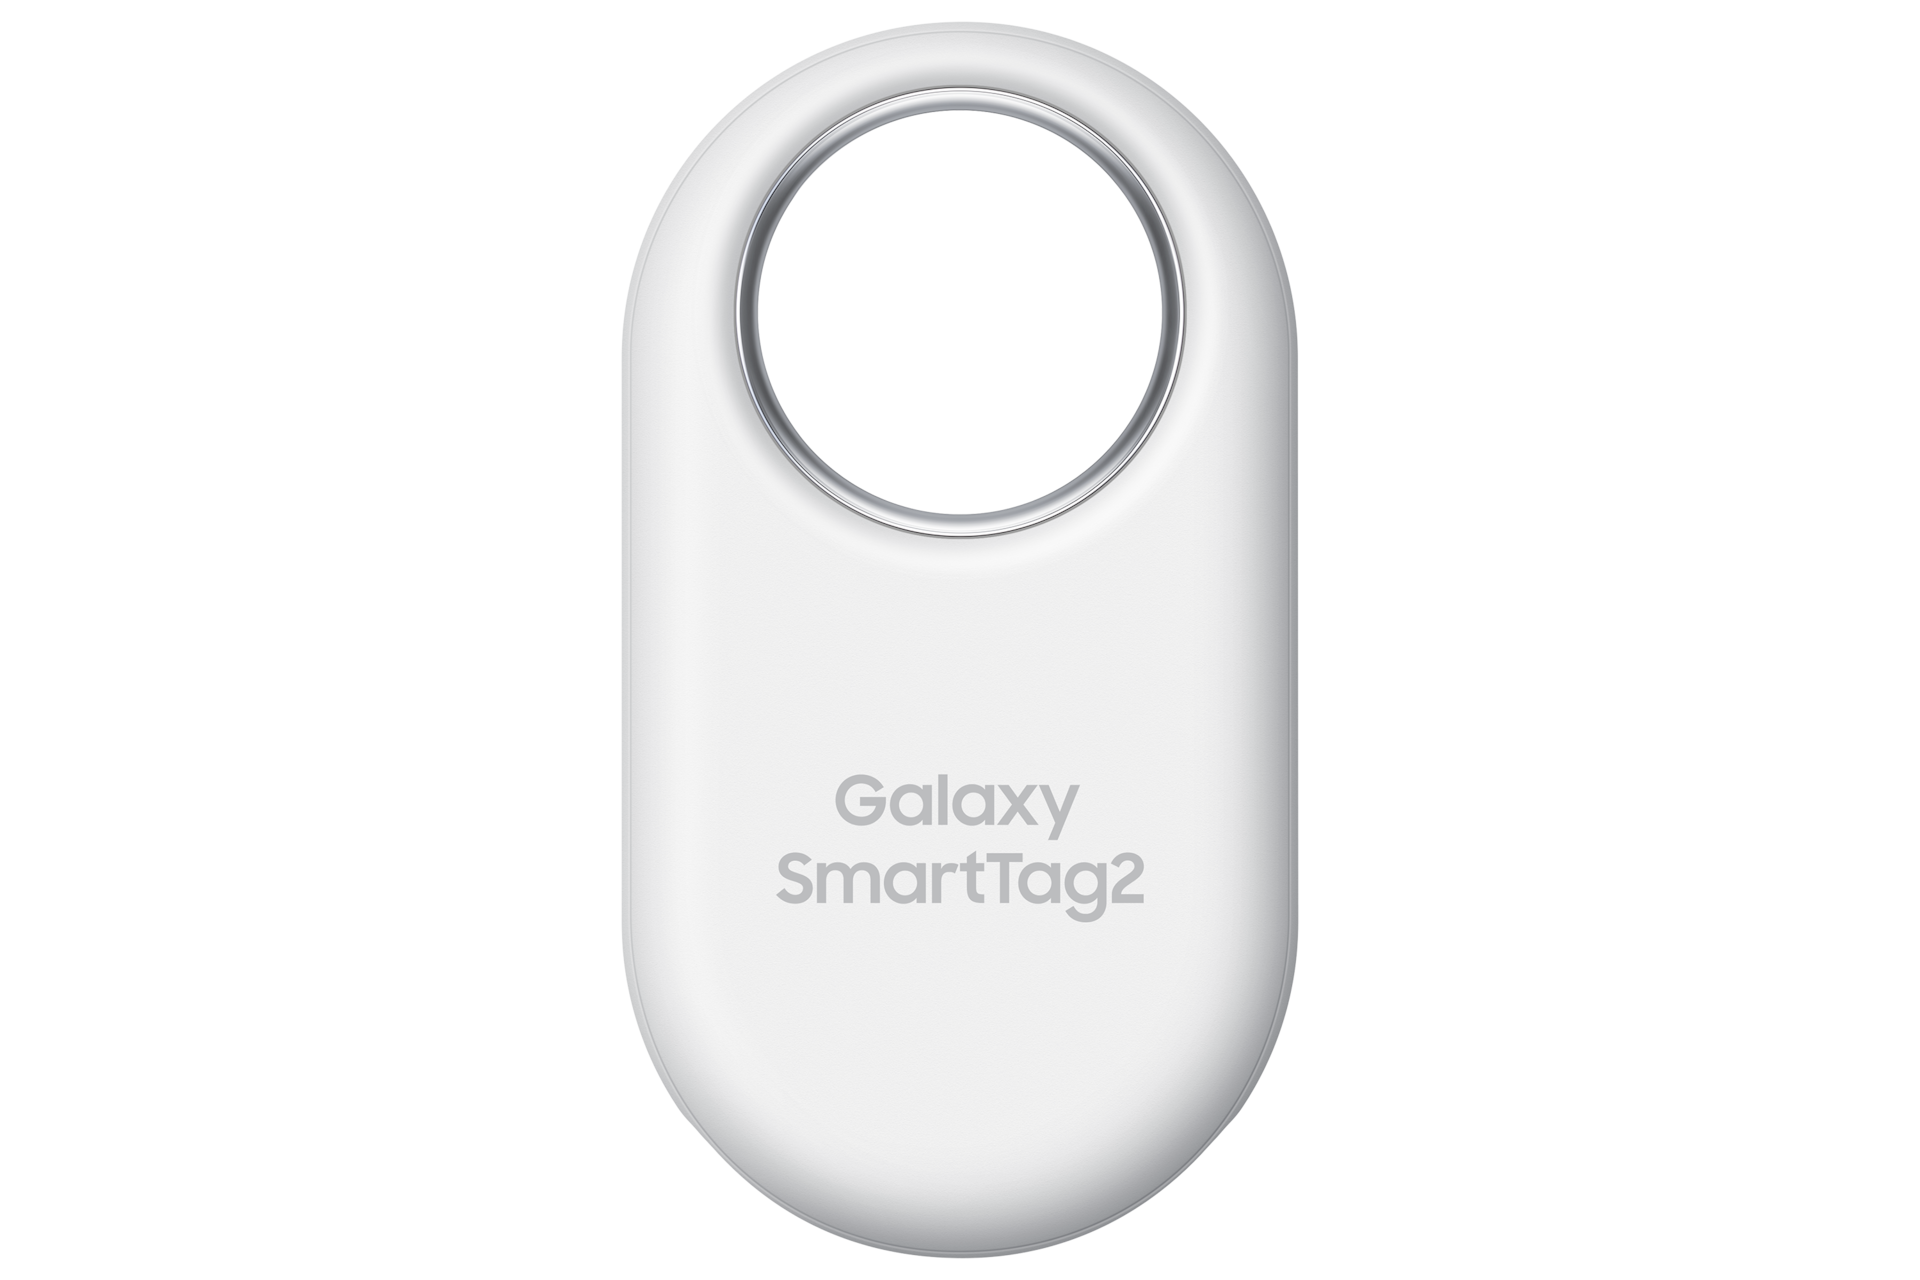 Galaxy SmartTag2: How to secure your valuables in 3 ways